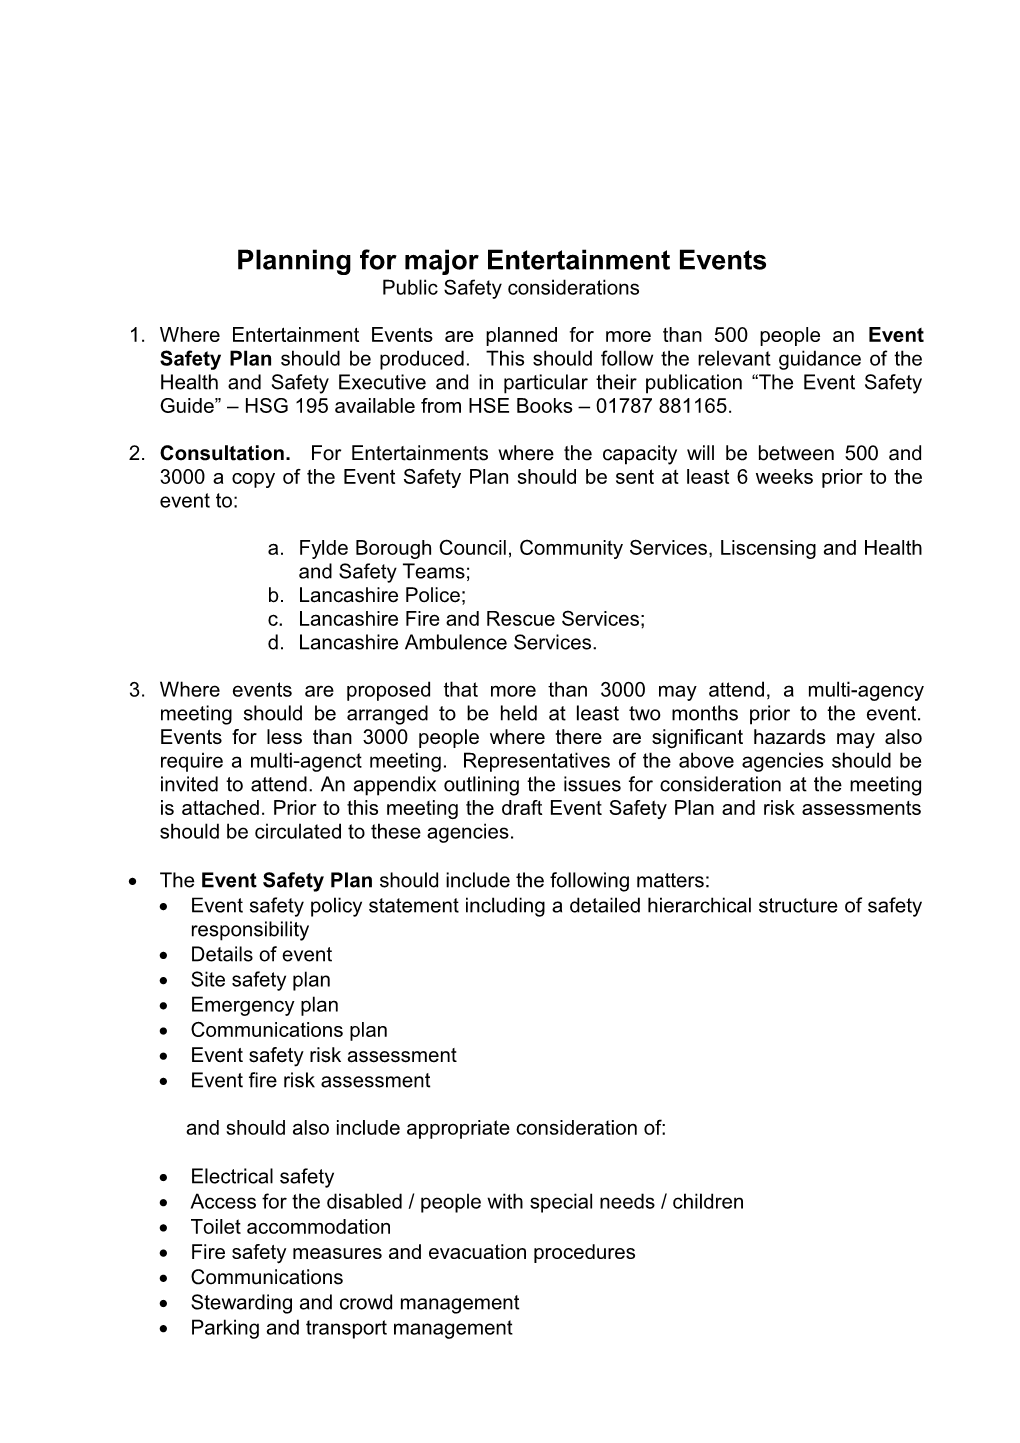 Planning for Major Entertainment Events